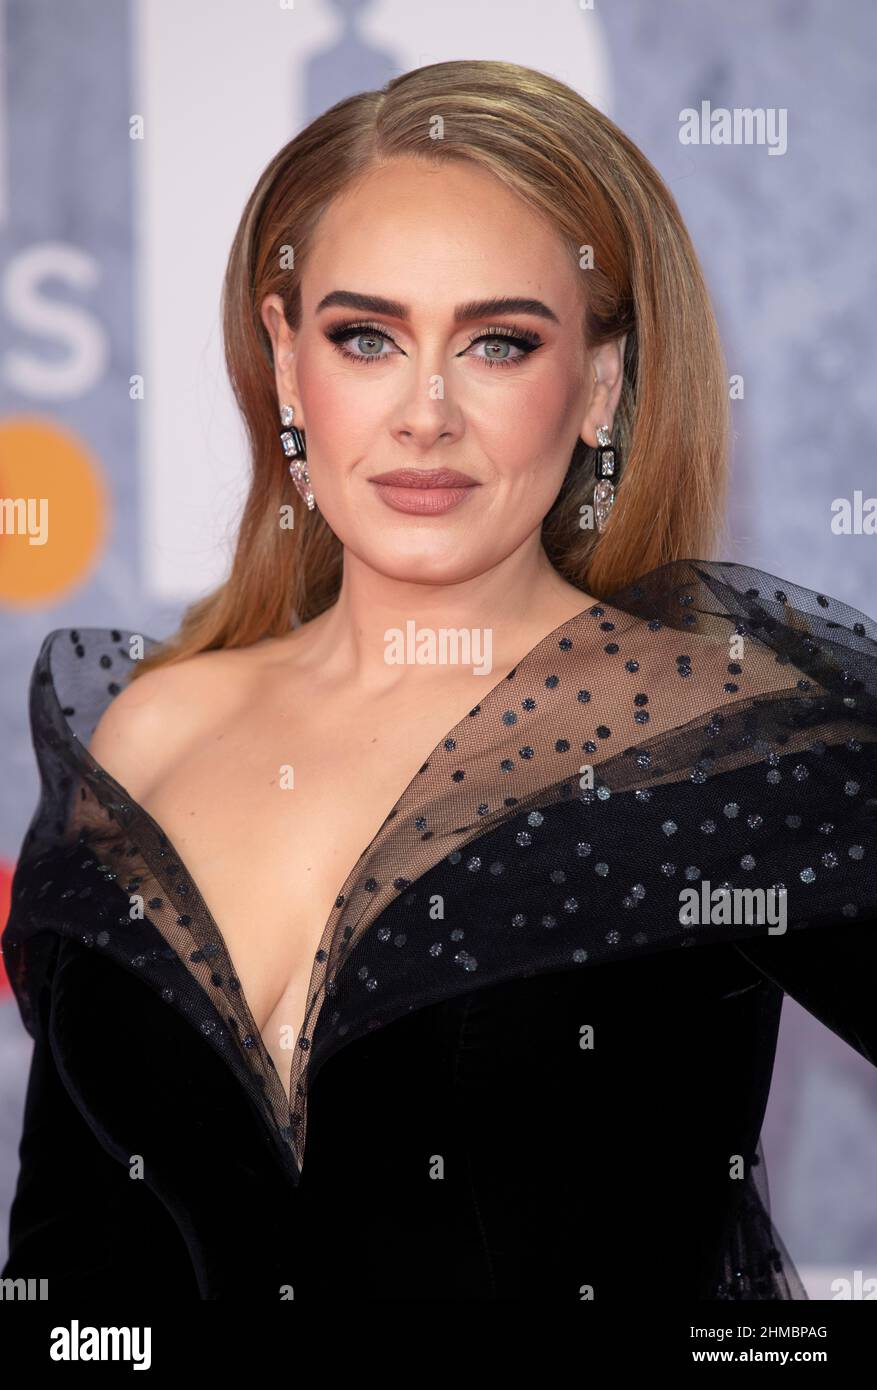 8th February, 2022. London, UK EDITORIAL USE ONLY Adele arriving at the BRIT Awards 2022 held at The O2, London. Credit: Doug Peters/EMPICS/Alamy Live News Stock Photo